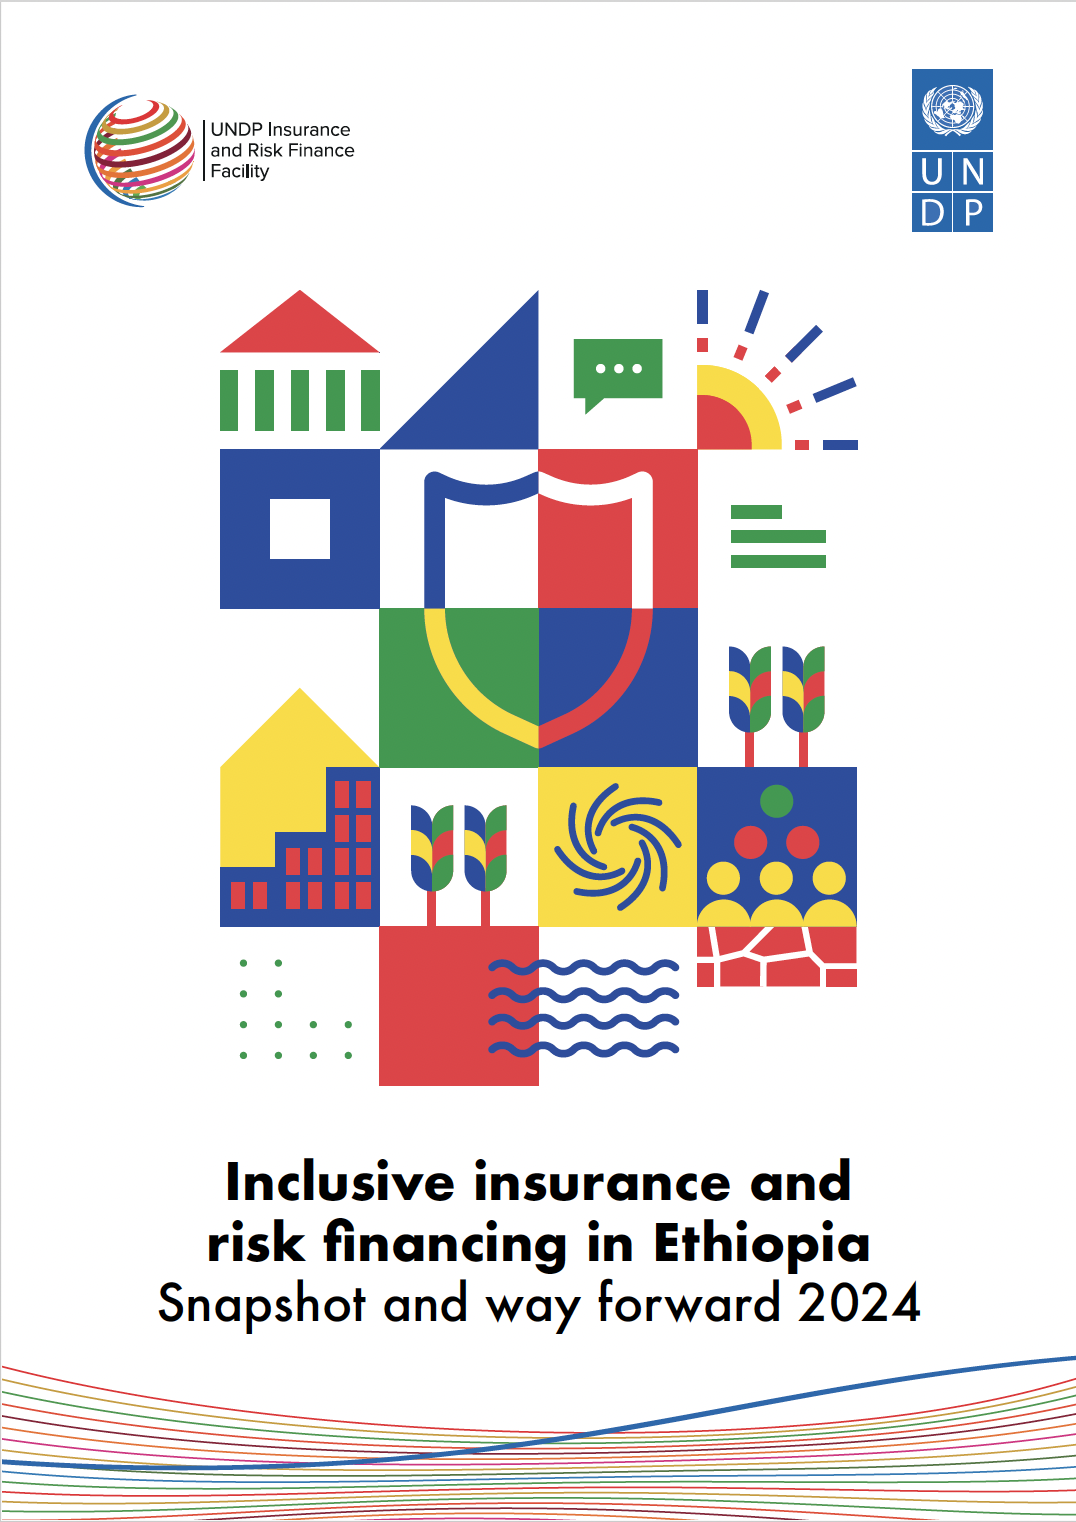 Inclusive insurance and risk financing in Ethiopia. Snapshot and way forward 2024